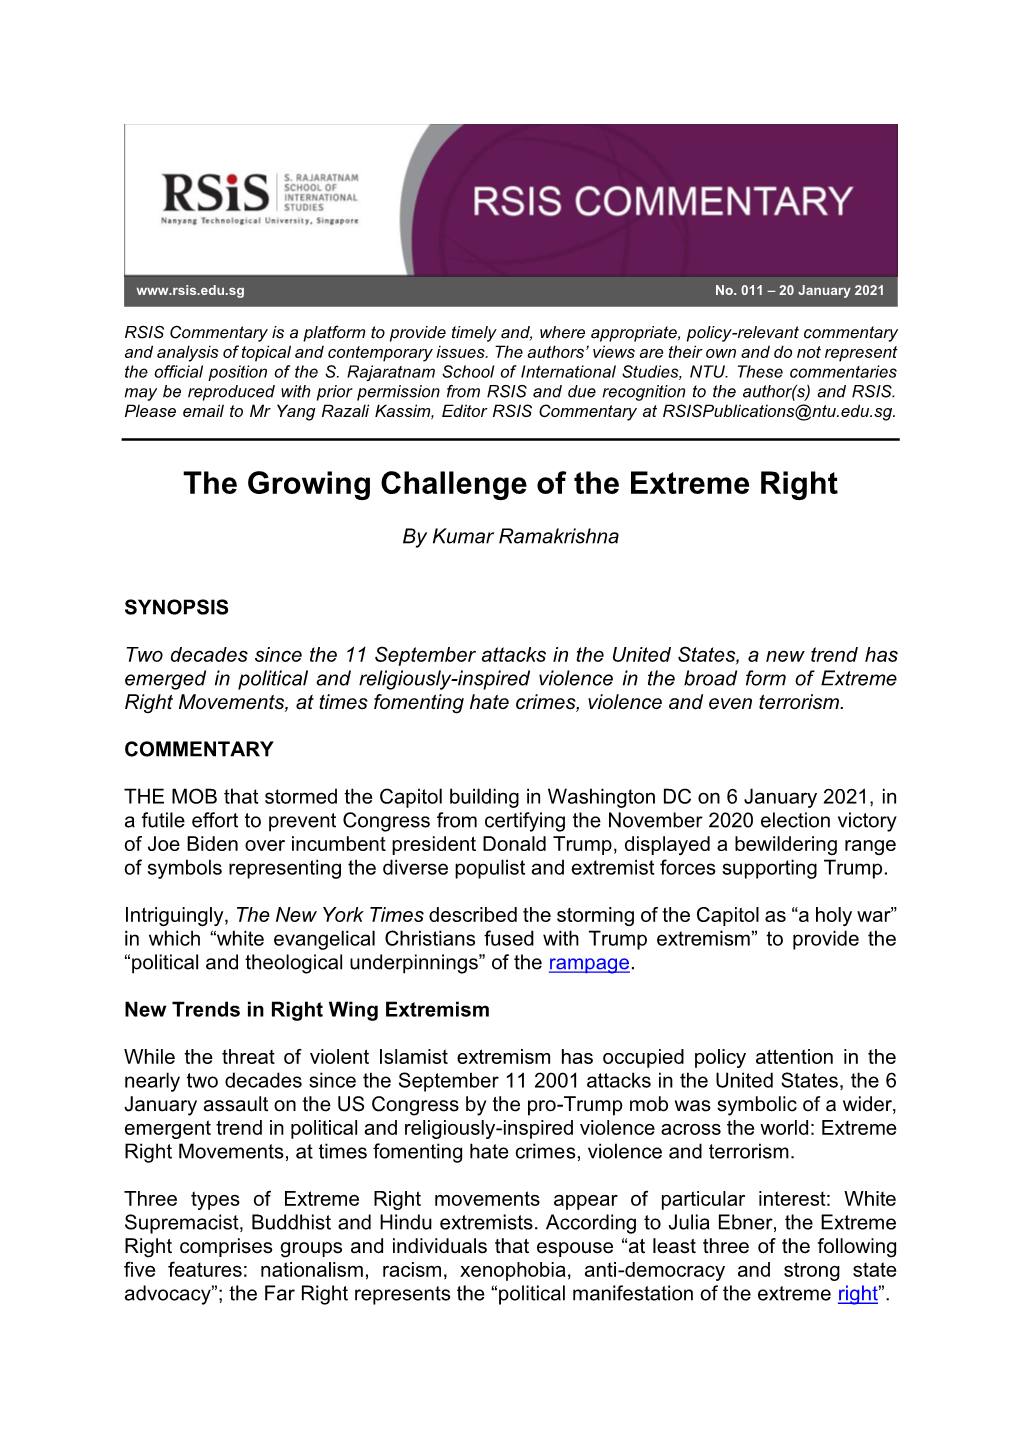 The Growing Challenge of the Extreme Right